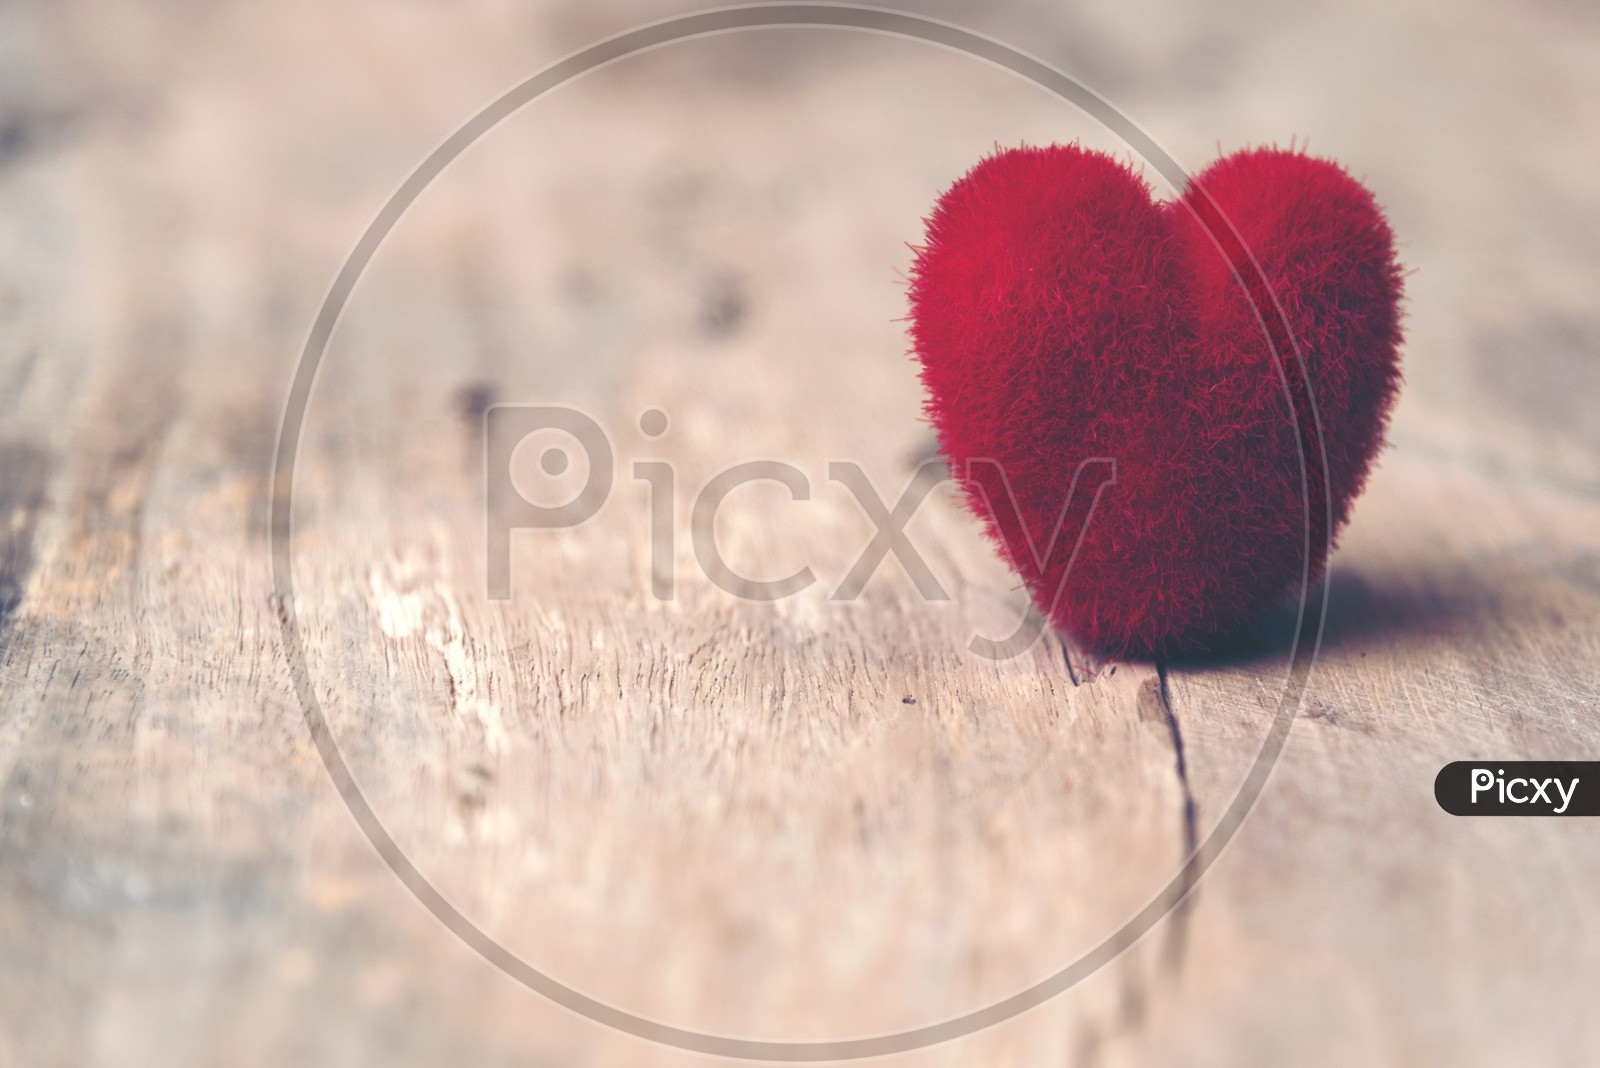 Close up of soft fur heart shaped toy with wooden background